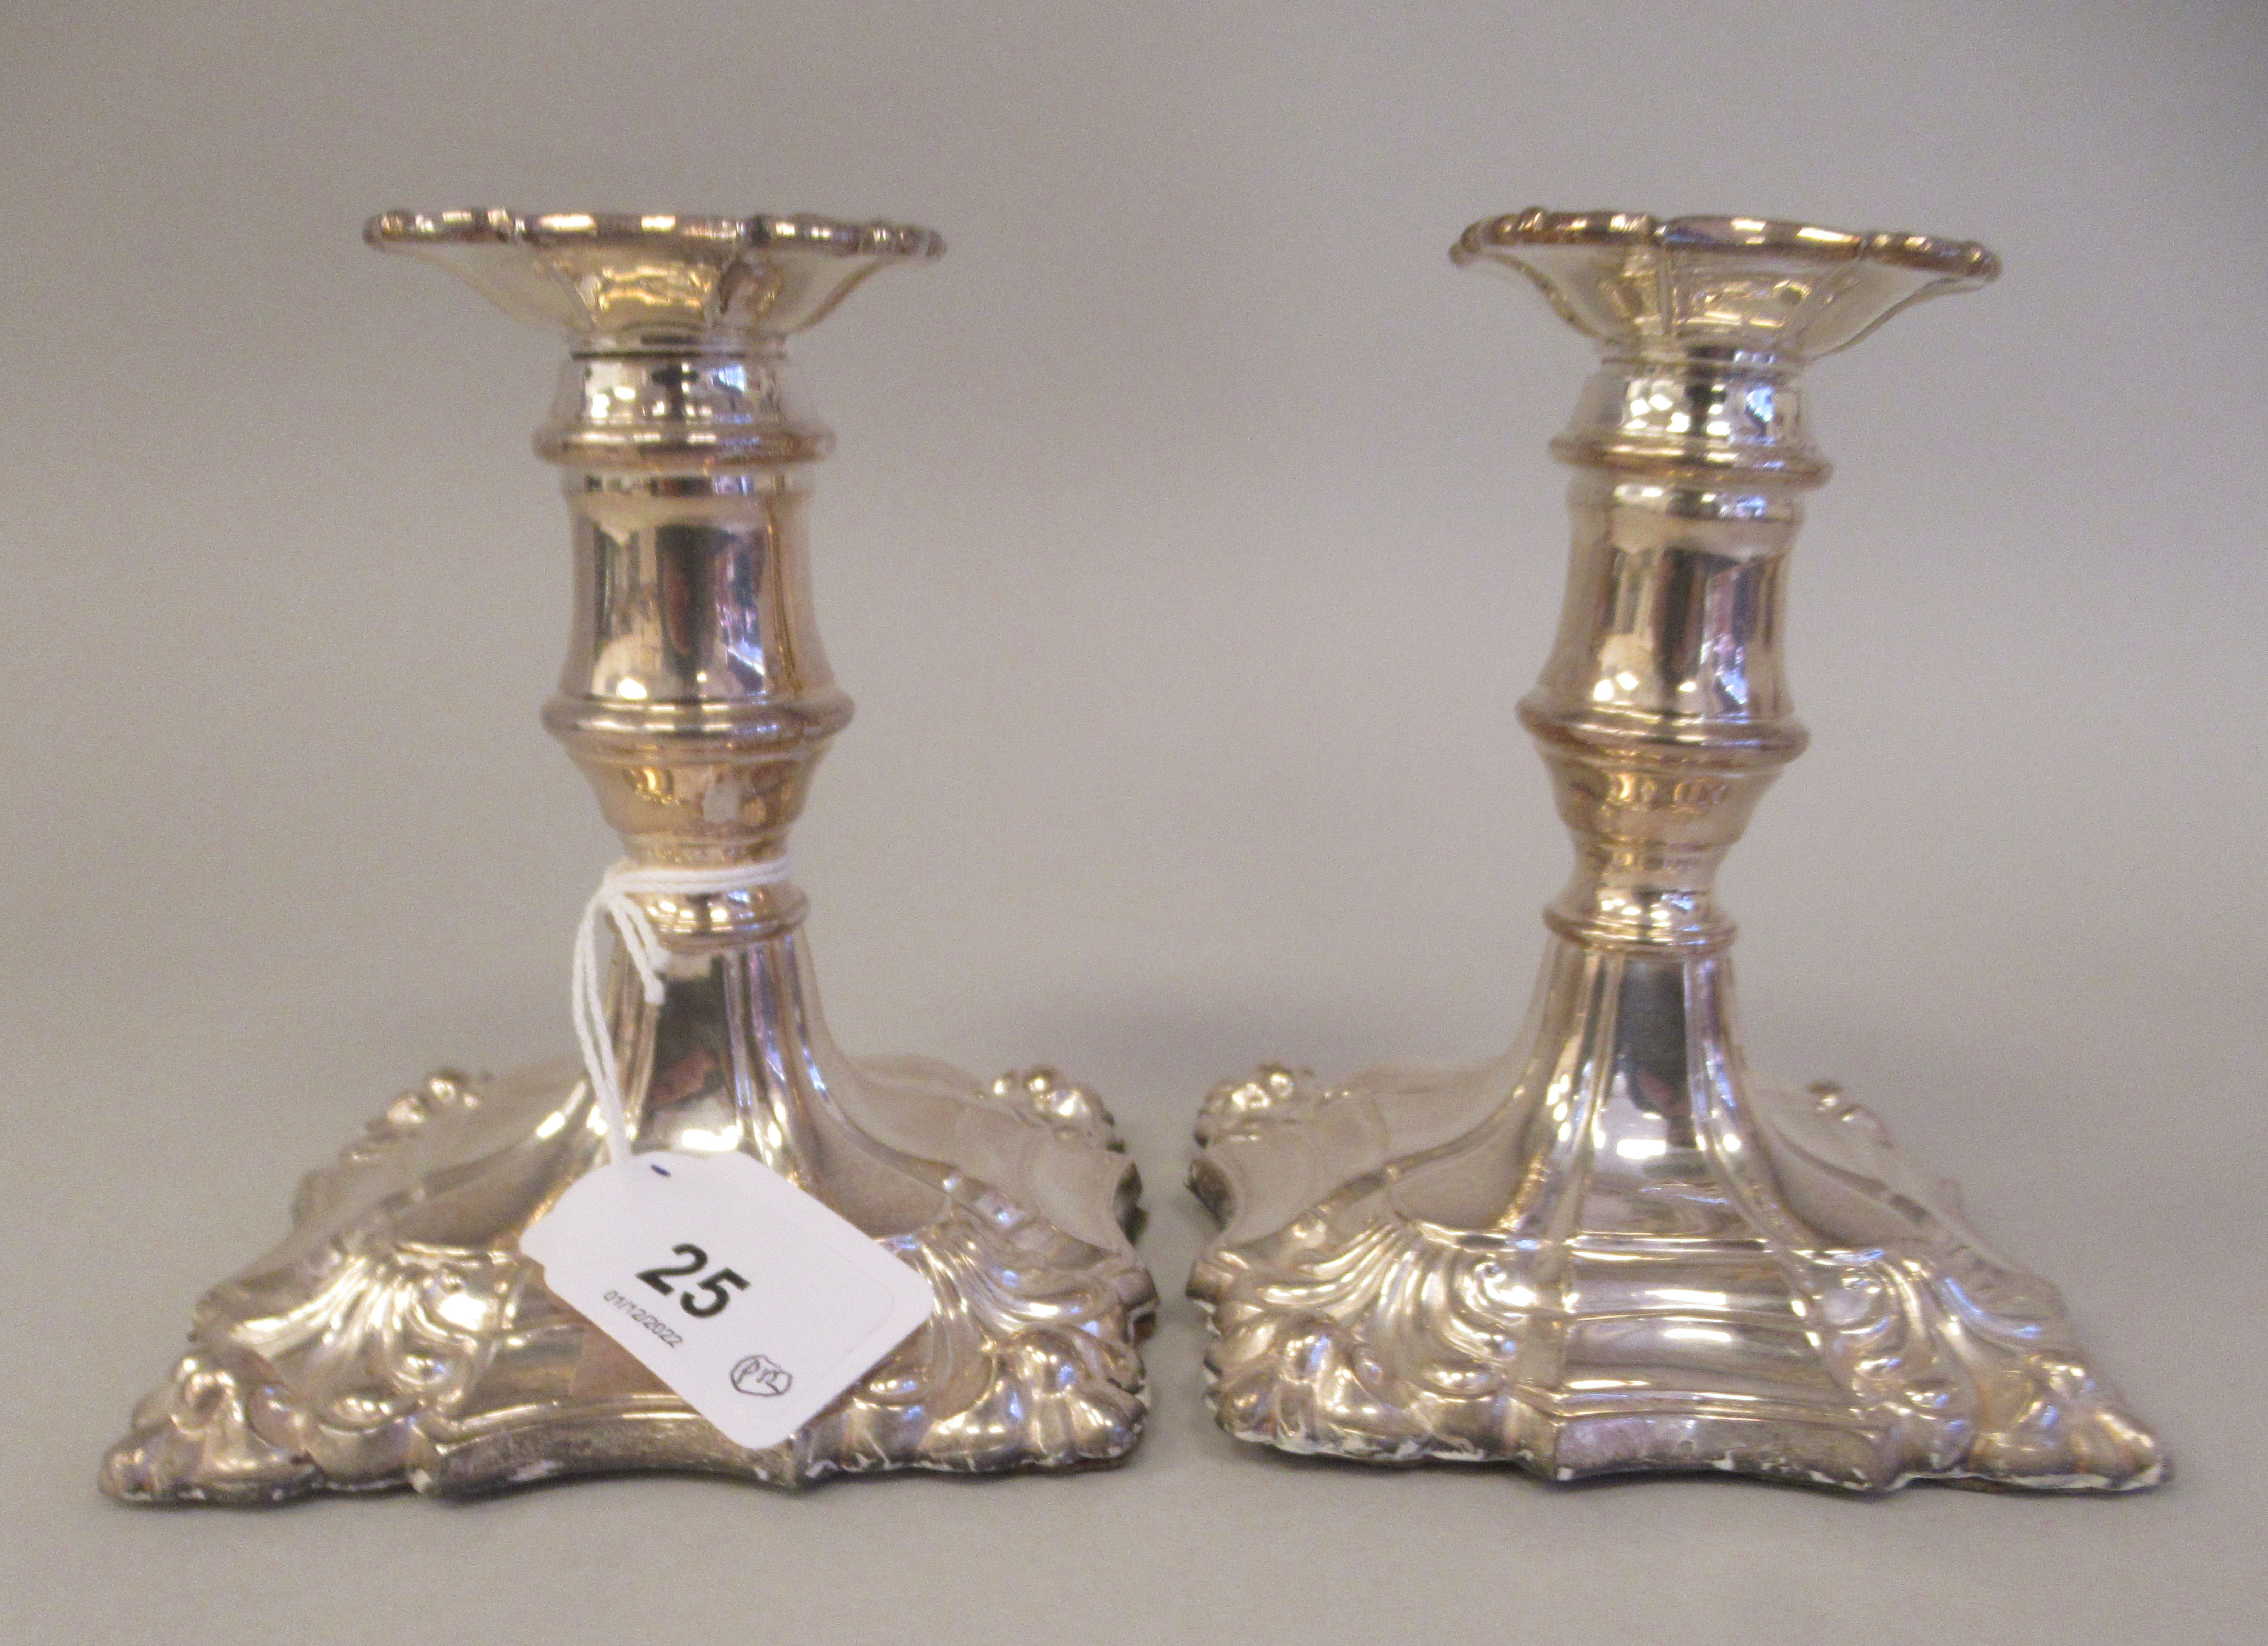 A pair of 18/19thC style loaded silver dwarf candlesticks, each with a detachable sconce and vase